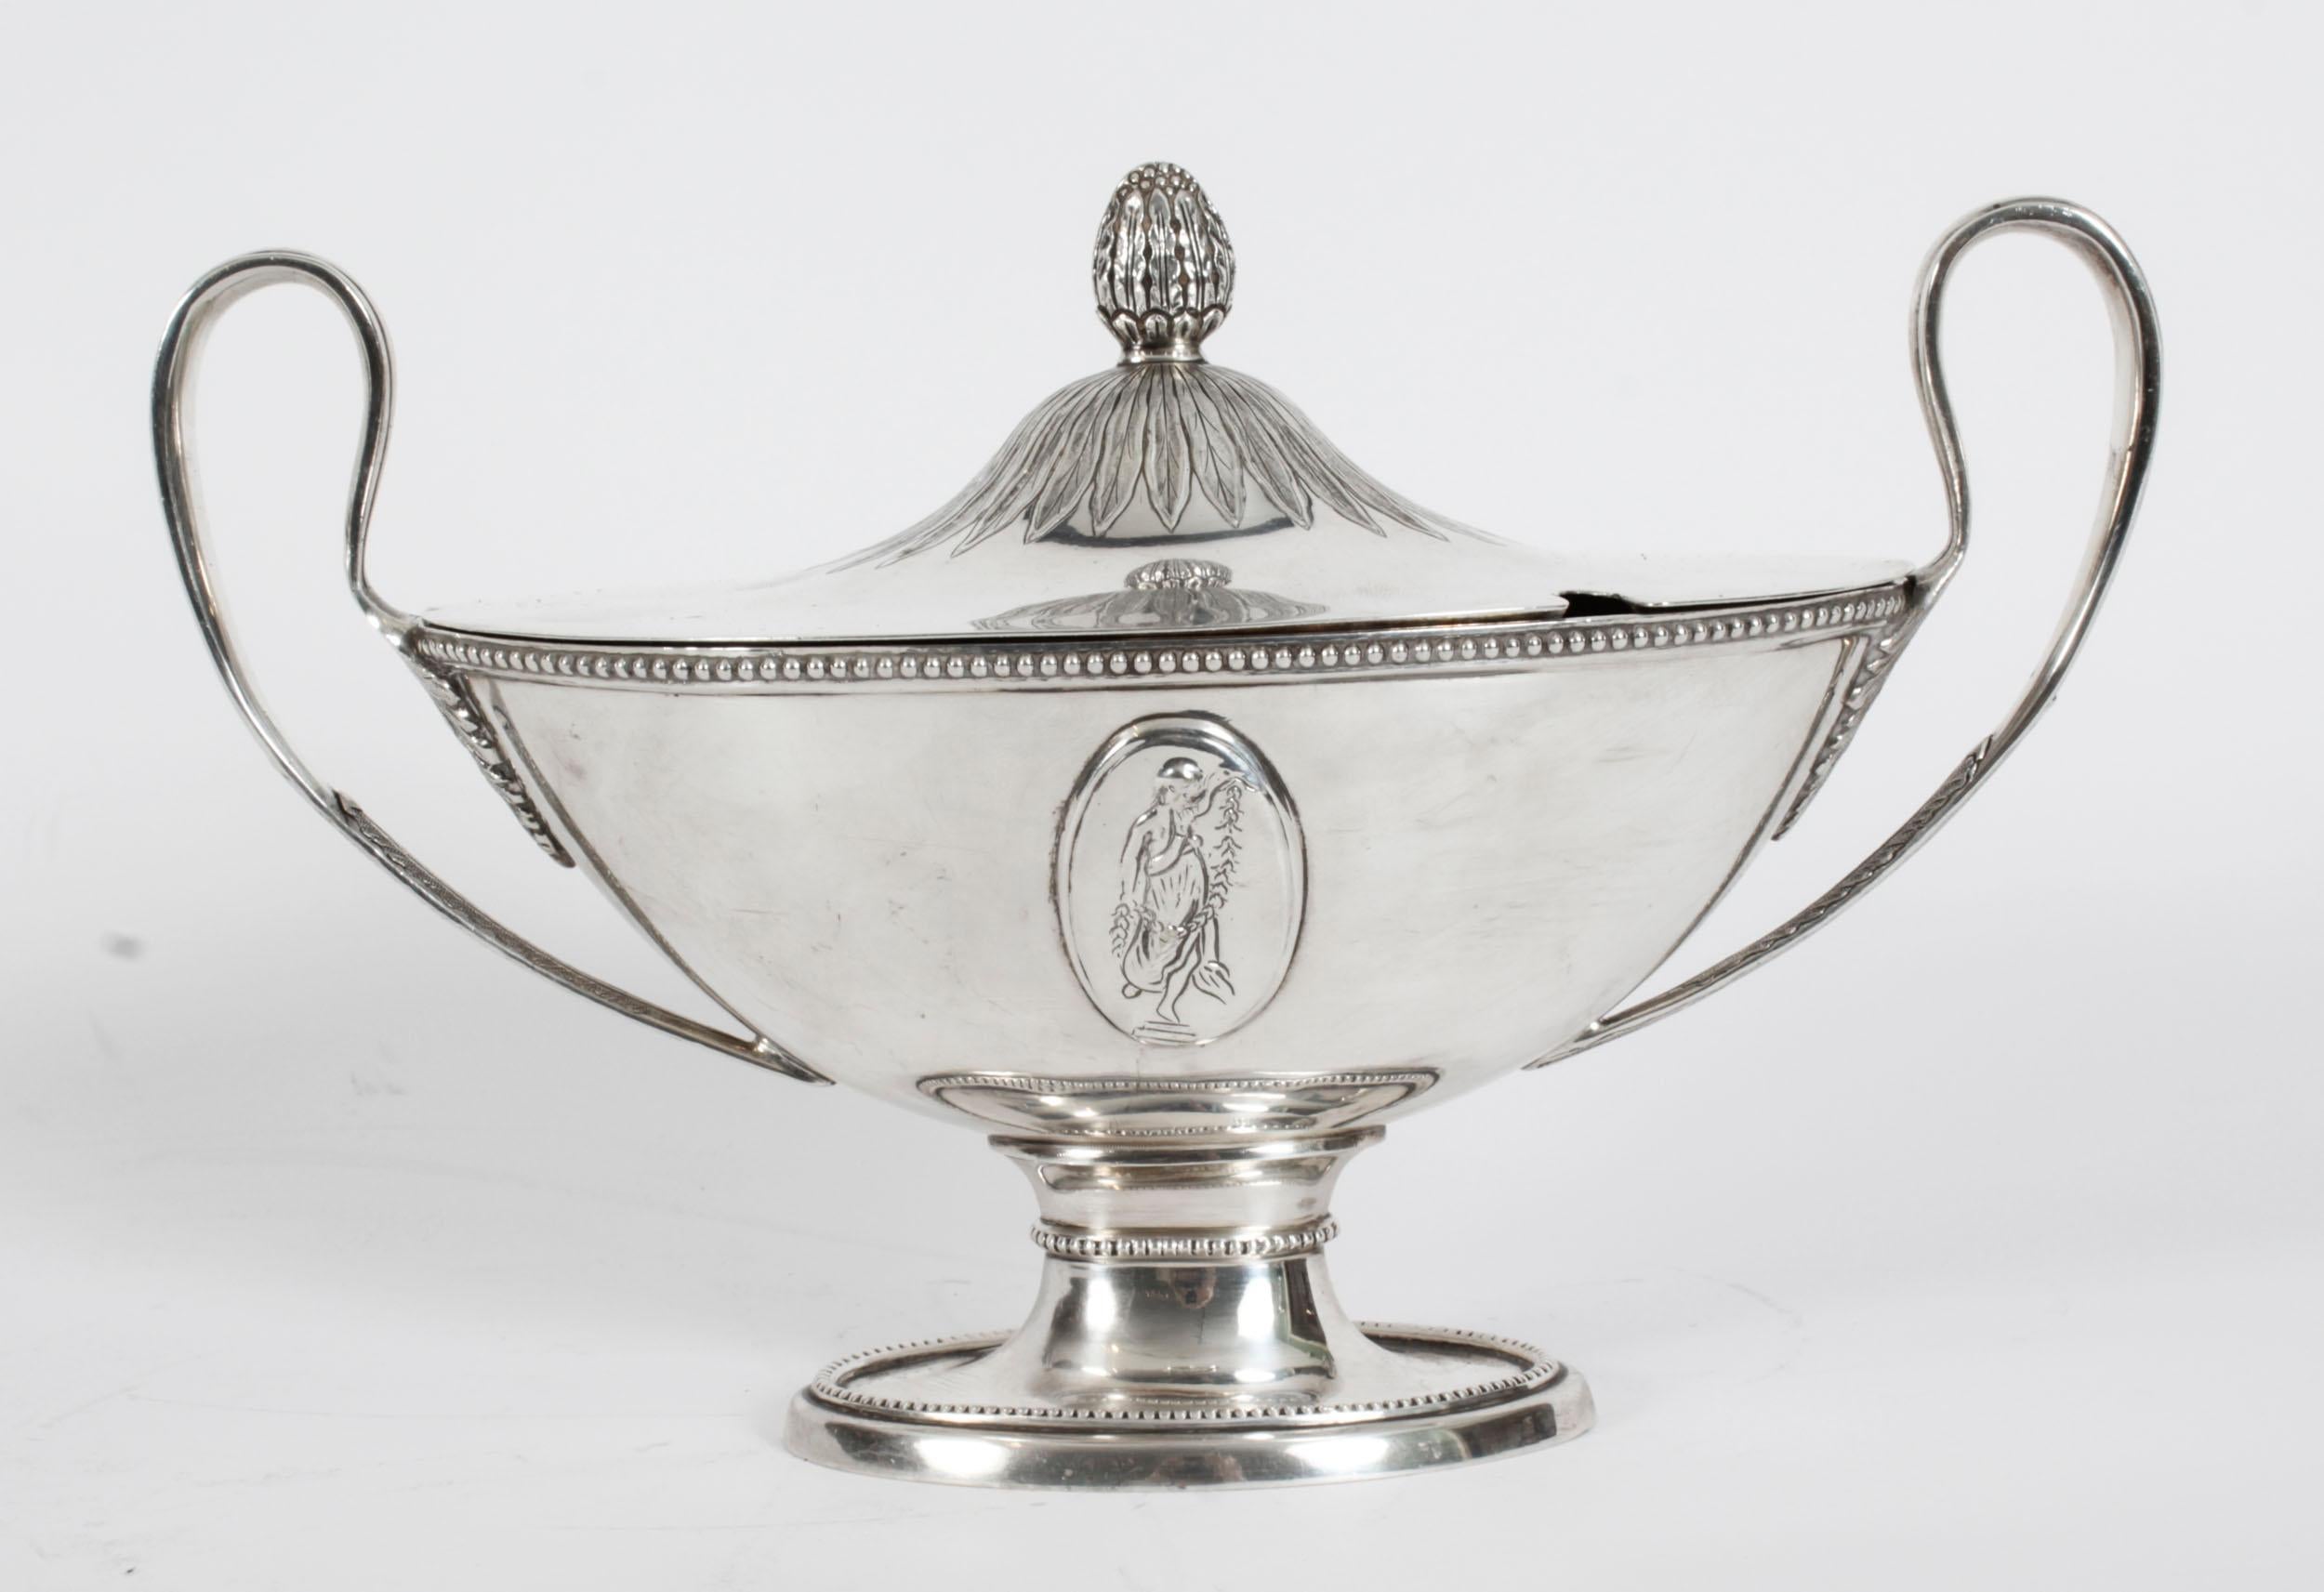 This is a exquisite and rare antique pair of English silver plated sauce tureens in the manne of Andrew Fogelberg, circa 1820 in date.
 
They are of classical urn shape each with a classical maiden plaque and featuring delightful beaded rims with